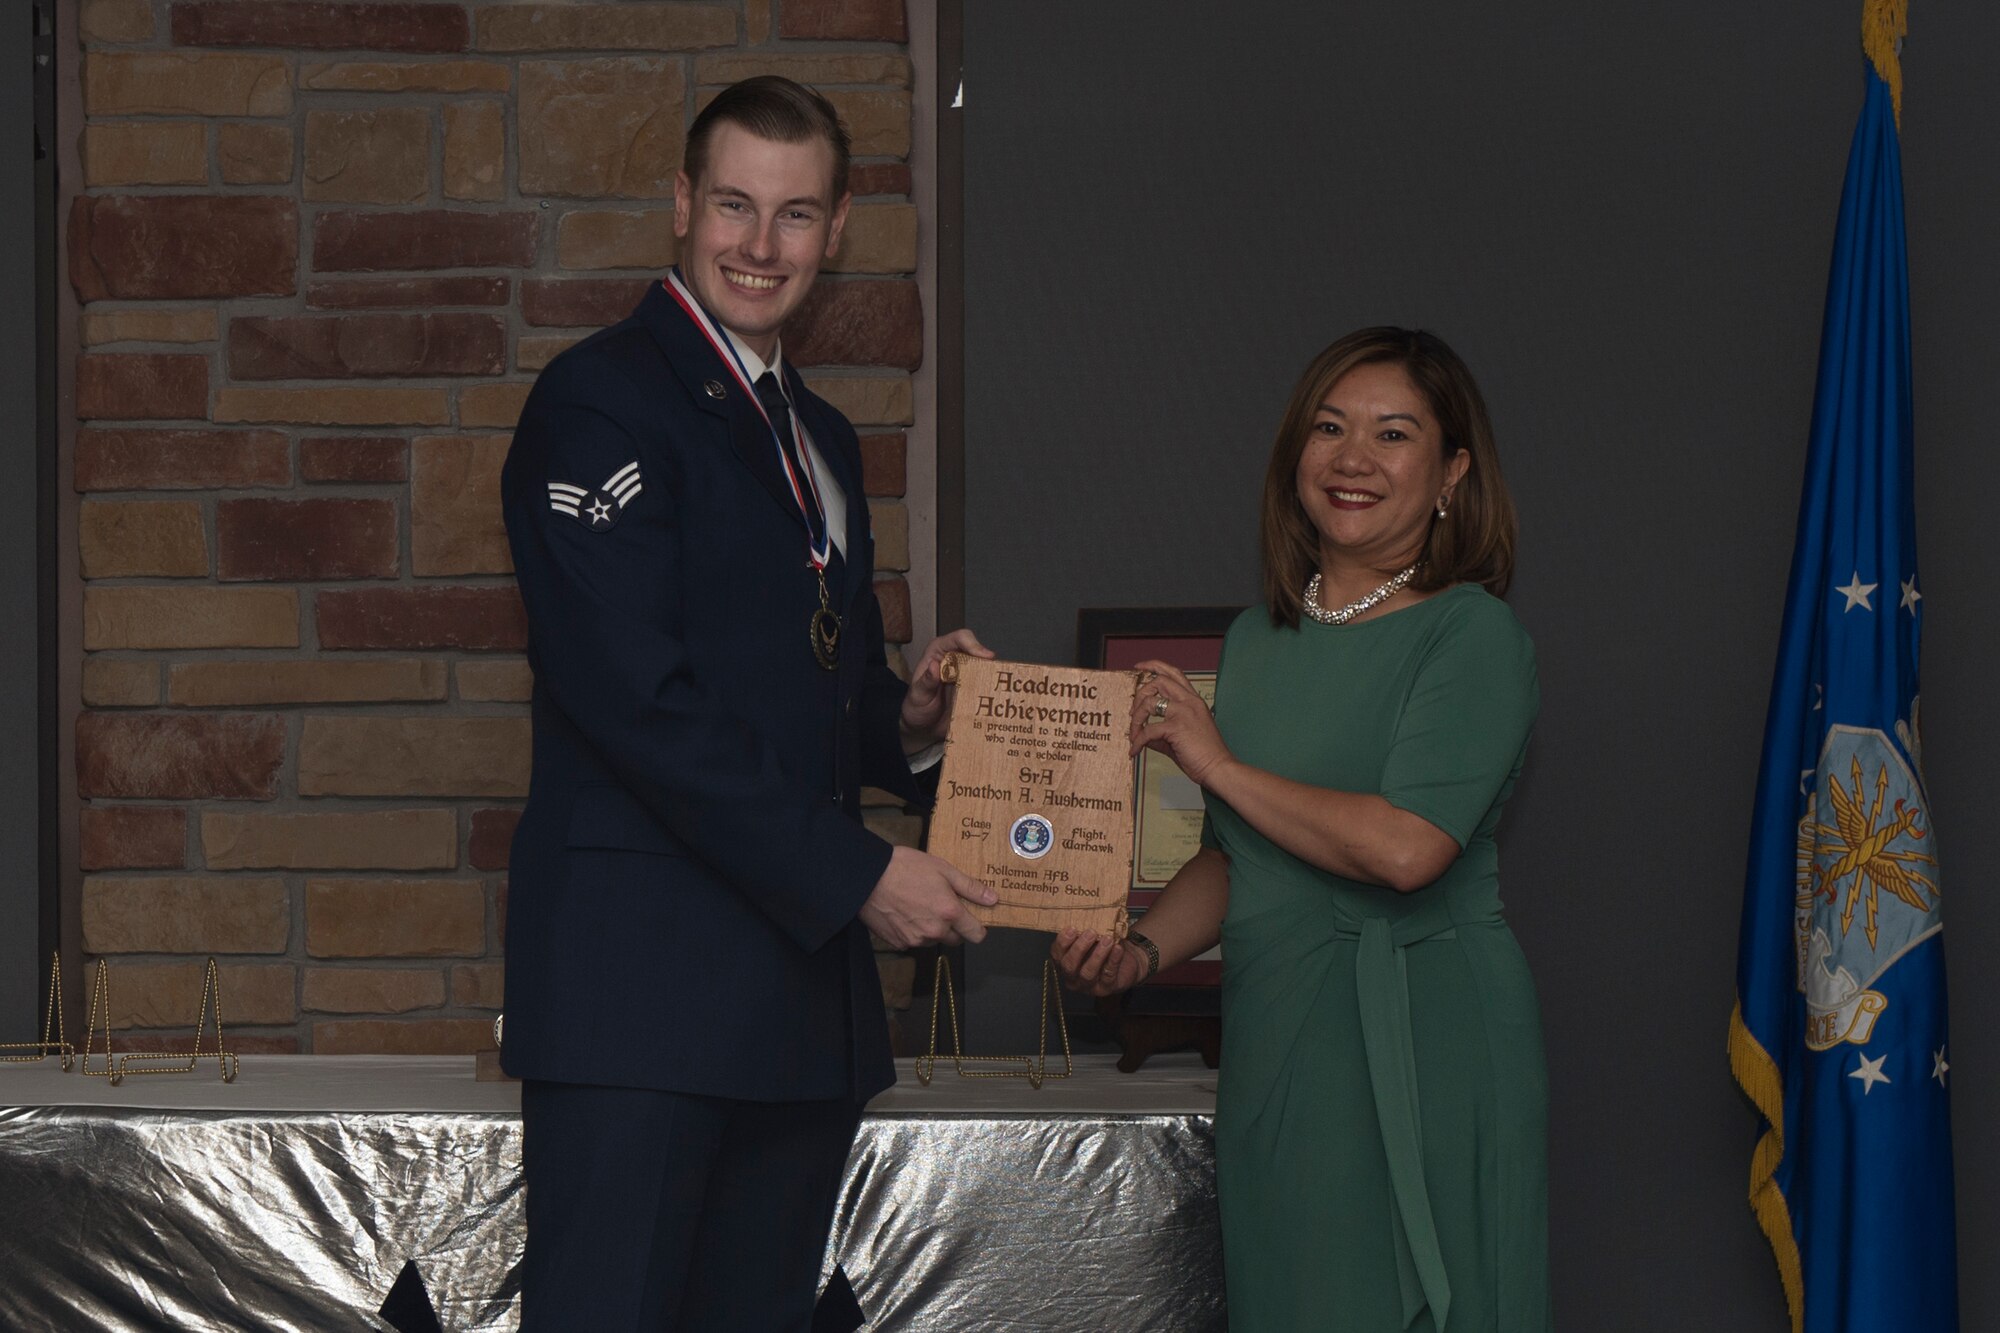 Senior Airman Jonathan Ausherman, Airman Leadership School graduate, accepts the academic award during the graduation of ALS class 19-7, October 10, 2019, on Holloman Air Force Base, N.M. The academic award is presented to the student with the highest overall average on all academic evaluations. (U.S. Air Force photo by Airman 1st Class Kristin Weathersby)